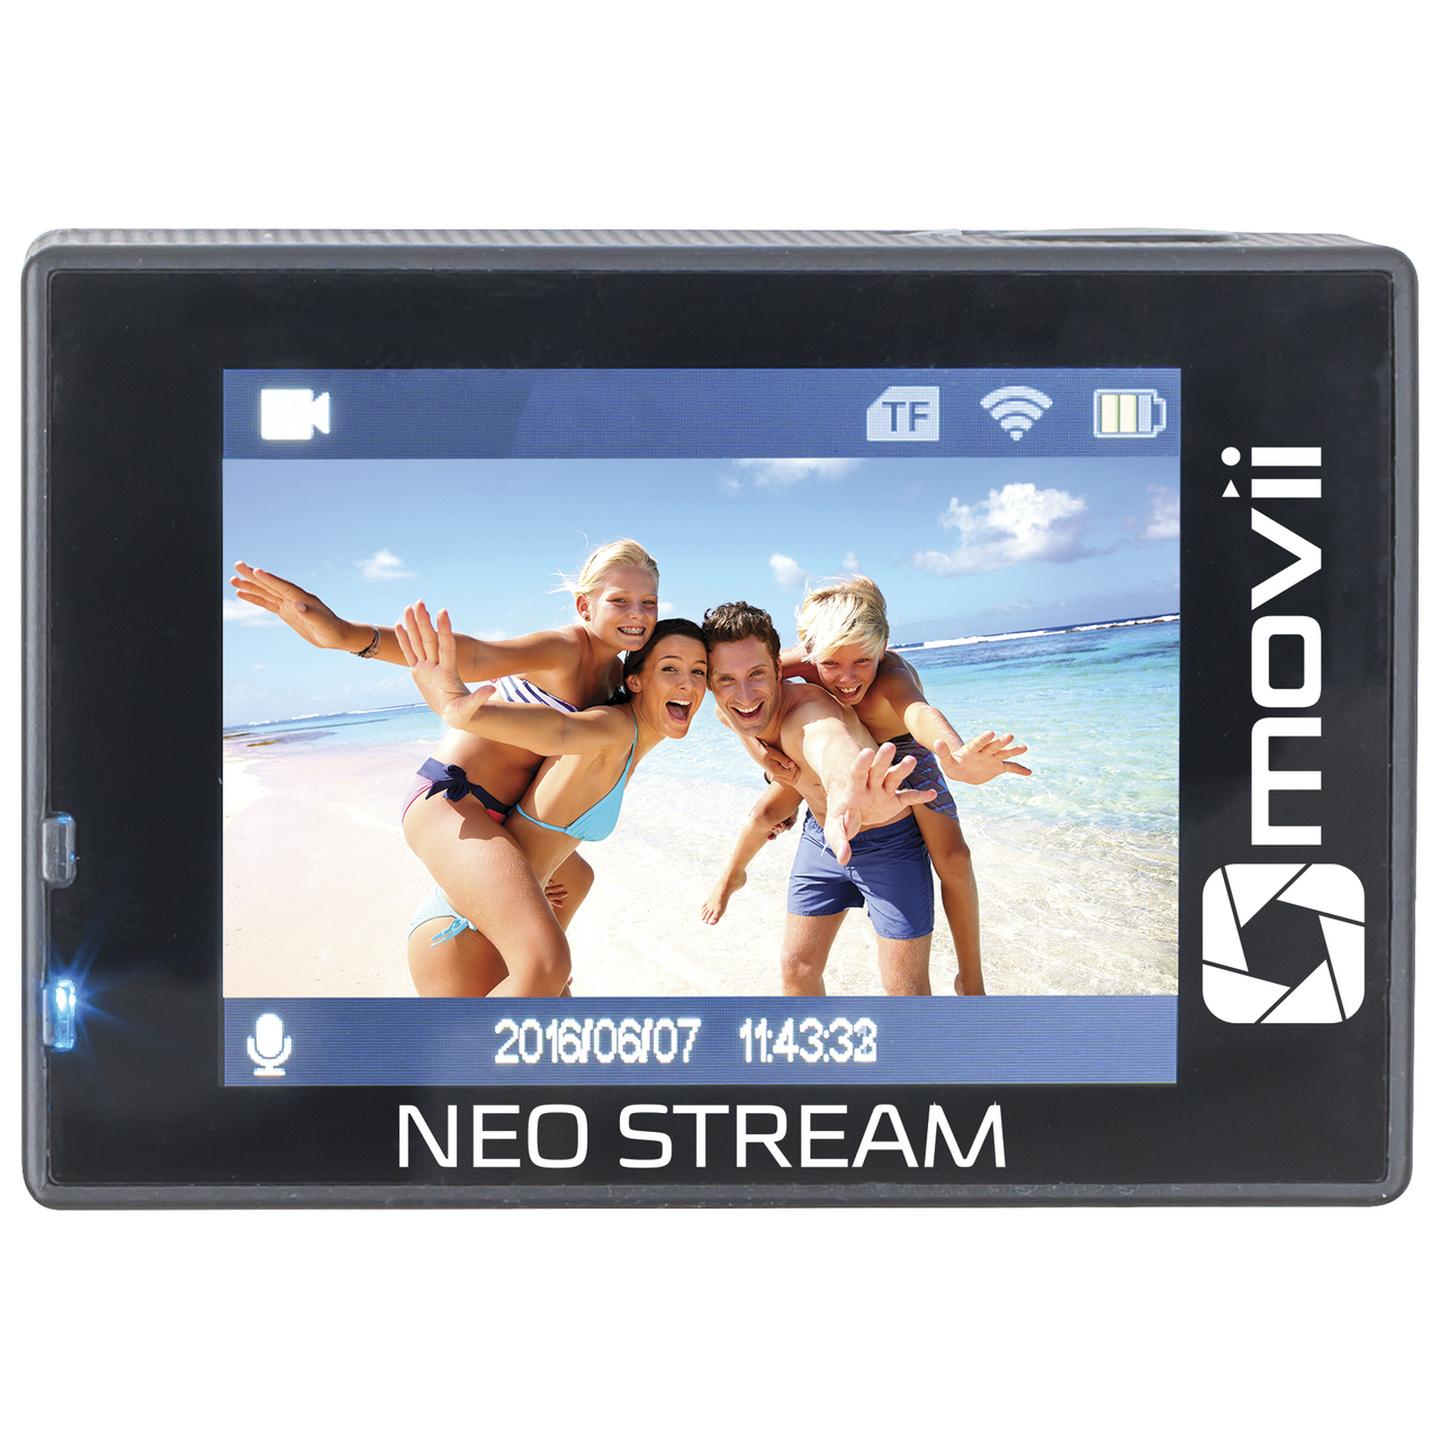 Movii Neostream 1080p Wi-Fi Action Camera with LCD